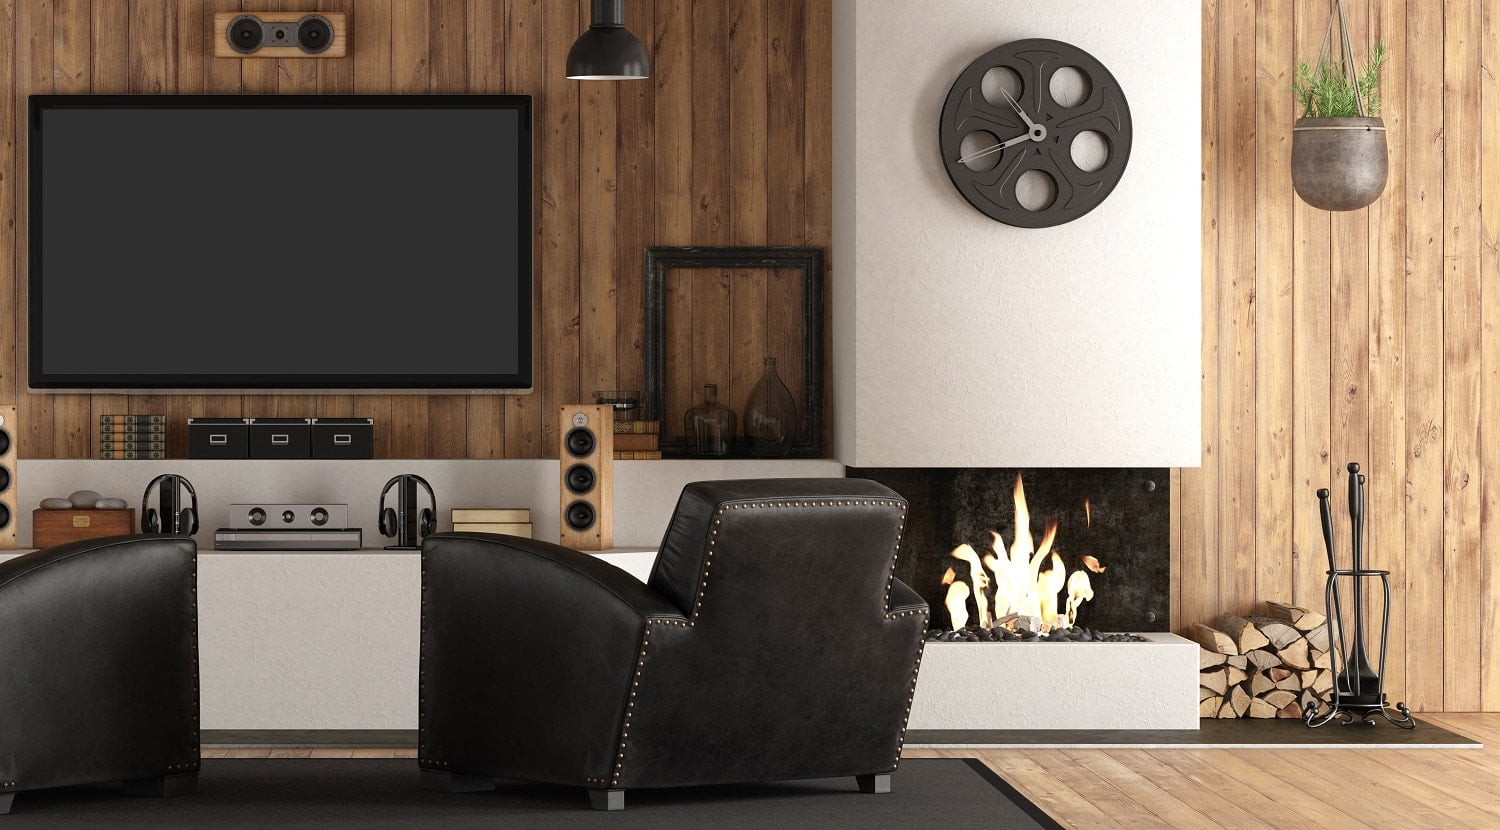 Home cinema in rustic stryle with black armchair, fireplace and wooden paneling - 3d rendering